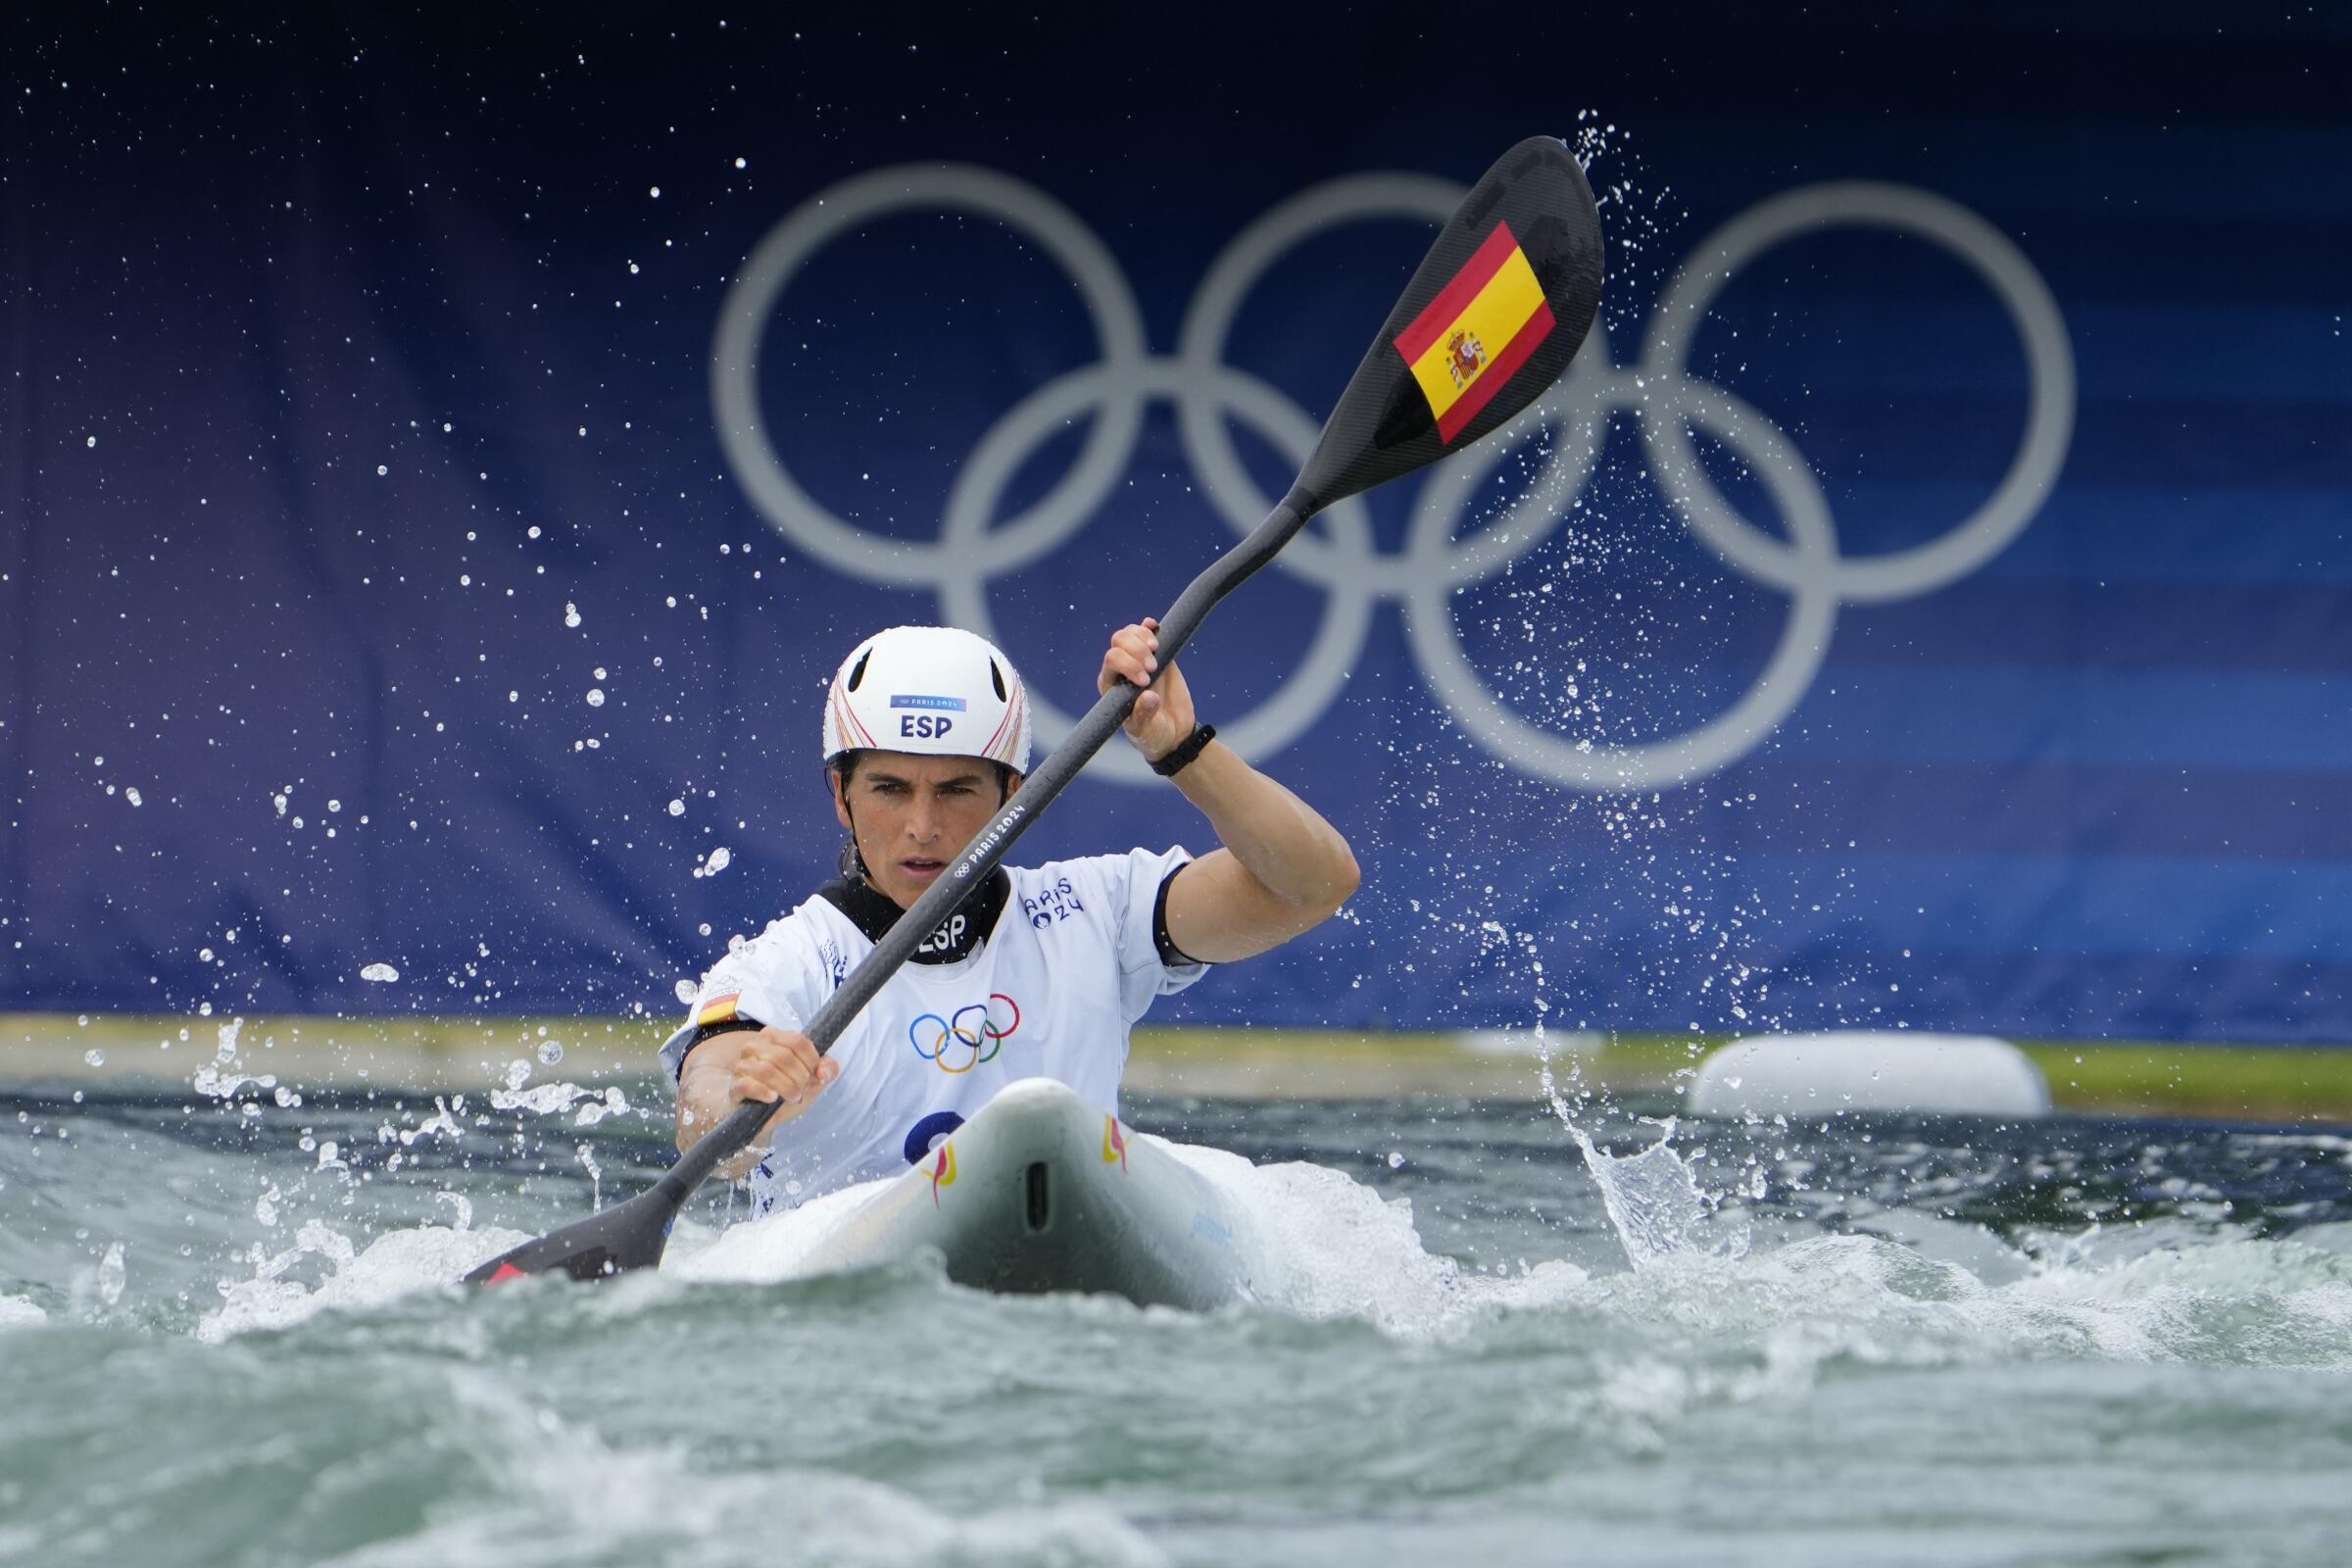 Maialen Chourraut, of Spain trains on the canoe slalom course at the 2024 Summer Olympics.